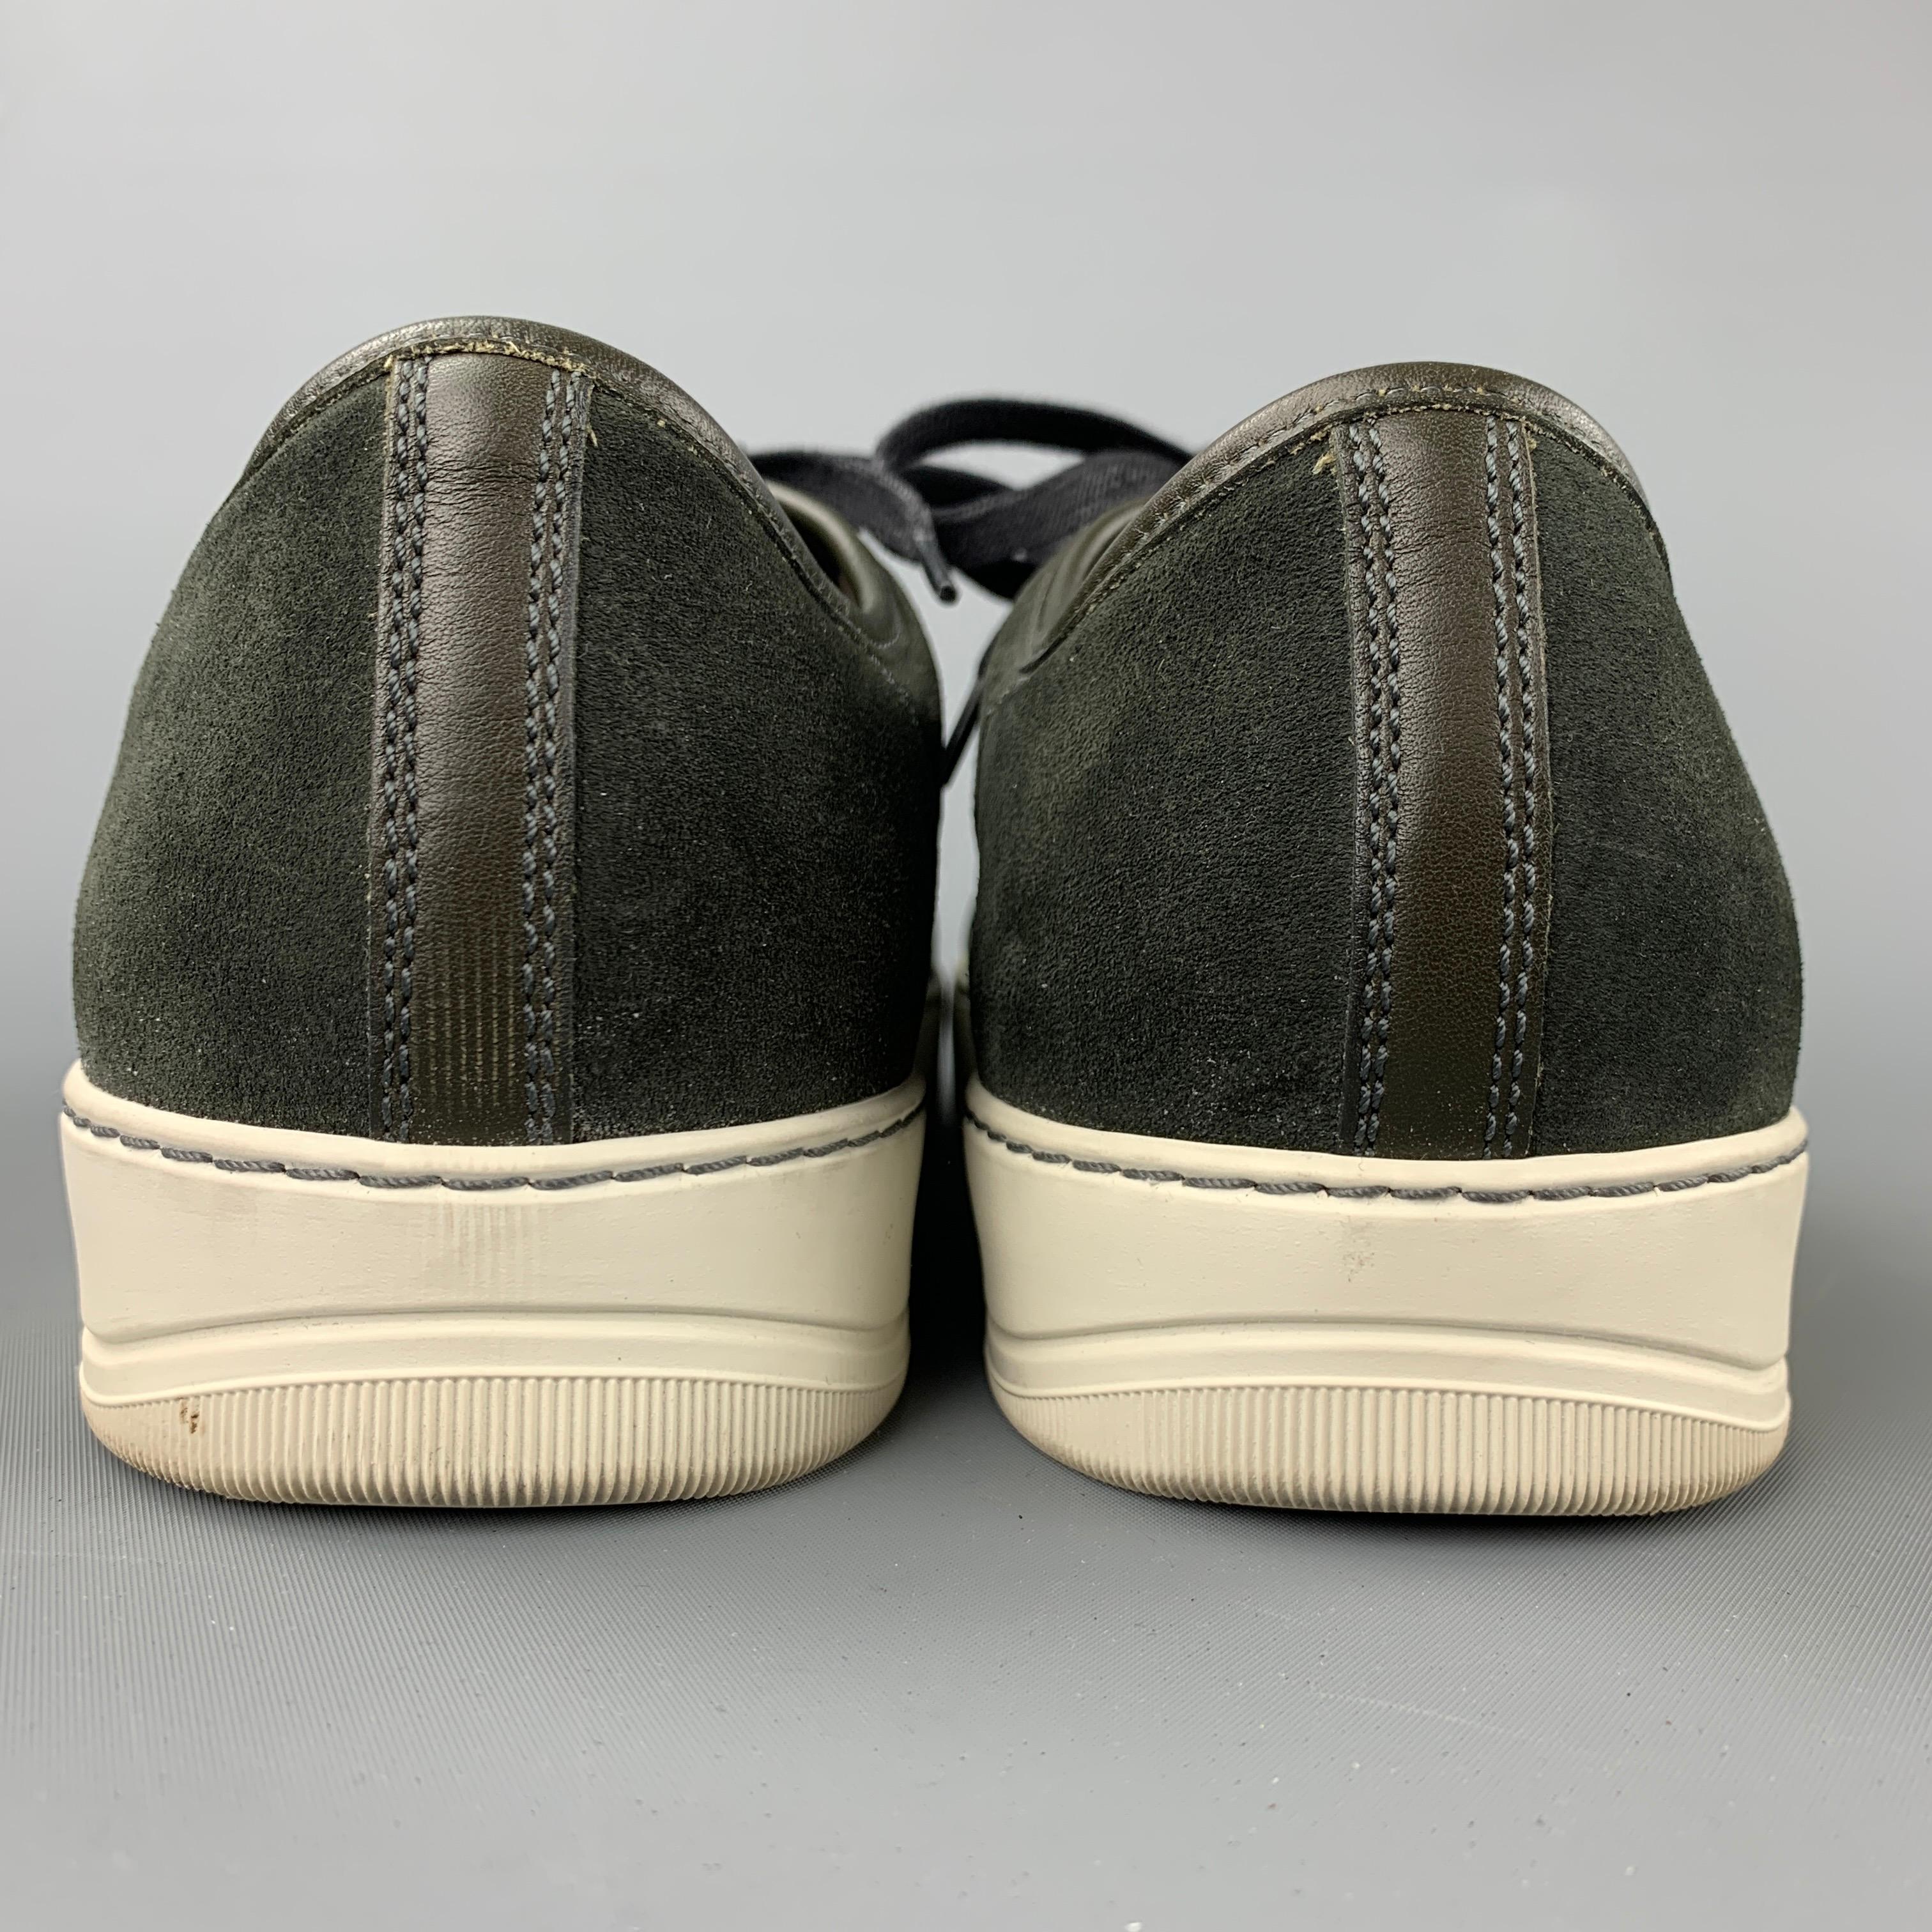 lanvin sneakers olive green